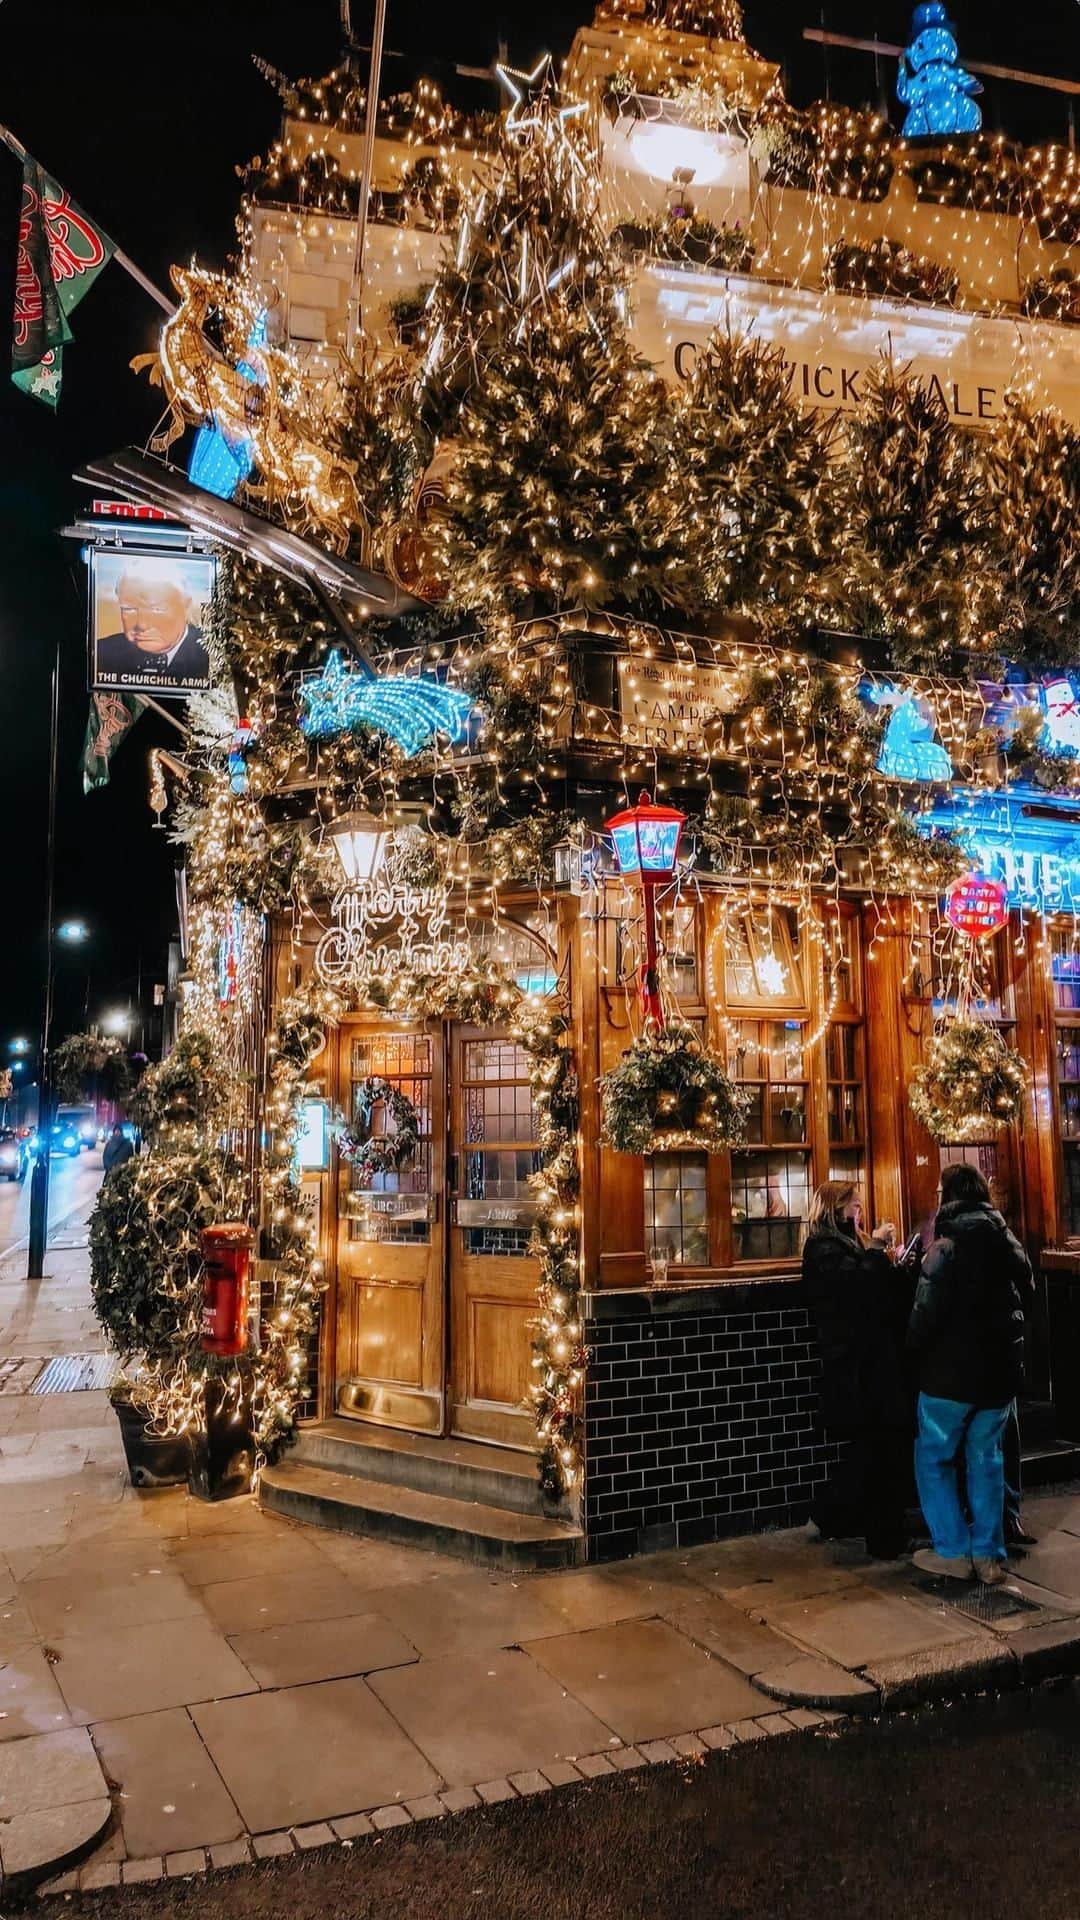 Izkizのインスタグラム：「Is this the most festive pub in London? 😍✨ The Churchill Arms in Kensington puts on a magical light display every Christmas season with over 22,000 lights covering their beautiful exterior. 🎁🎄✨🎅🏻  #Xmas #ChristmasinLondon #LondonatChristmas London at Christmas, Christmas, London, Christmas lights, Christmas decorations, Xmas in England #London #england #VisitLondon #Christmas #XmasinLondon Christmas lights in London #NottingHill」